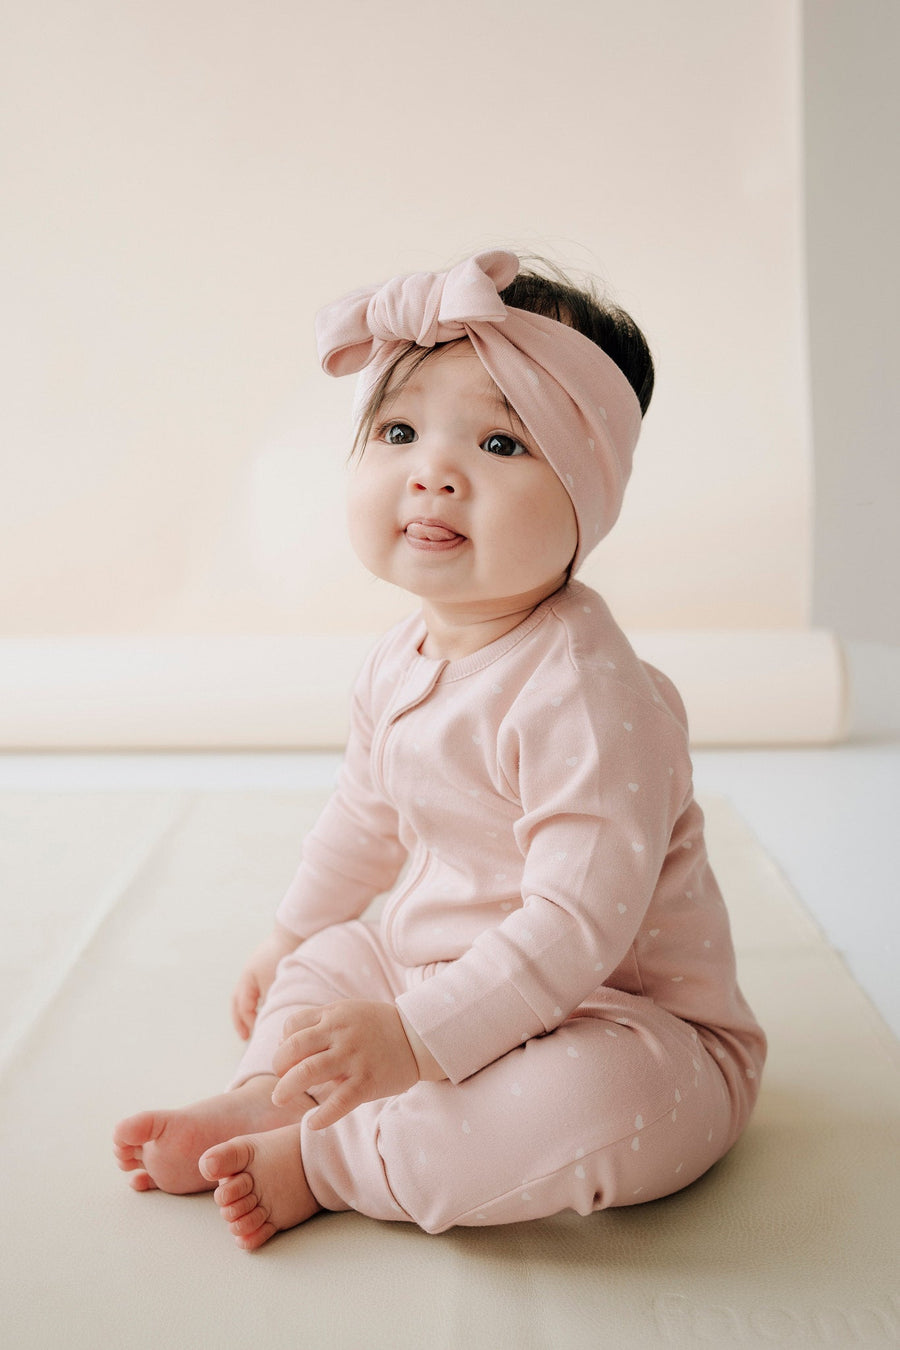 Organic Cotton Gracelyn Onepiece - Mon Amour Rose Childrens Onepiece from Jamie Kay NZ